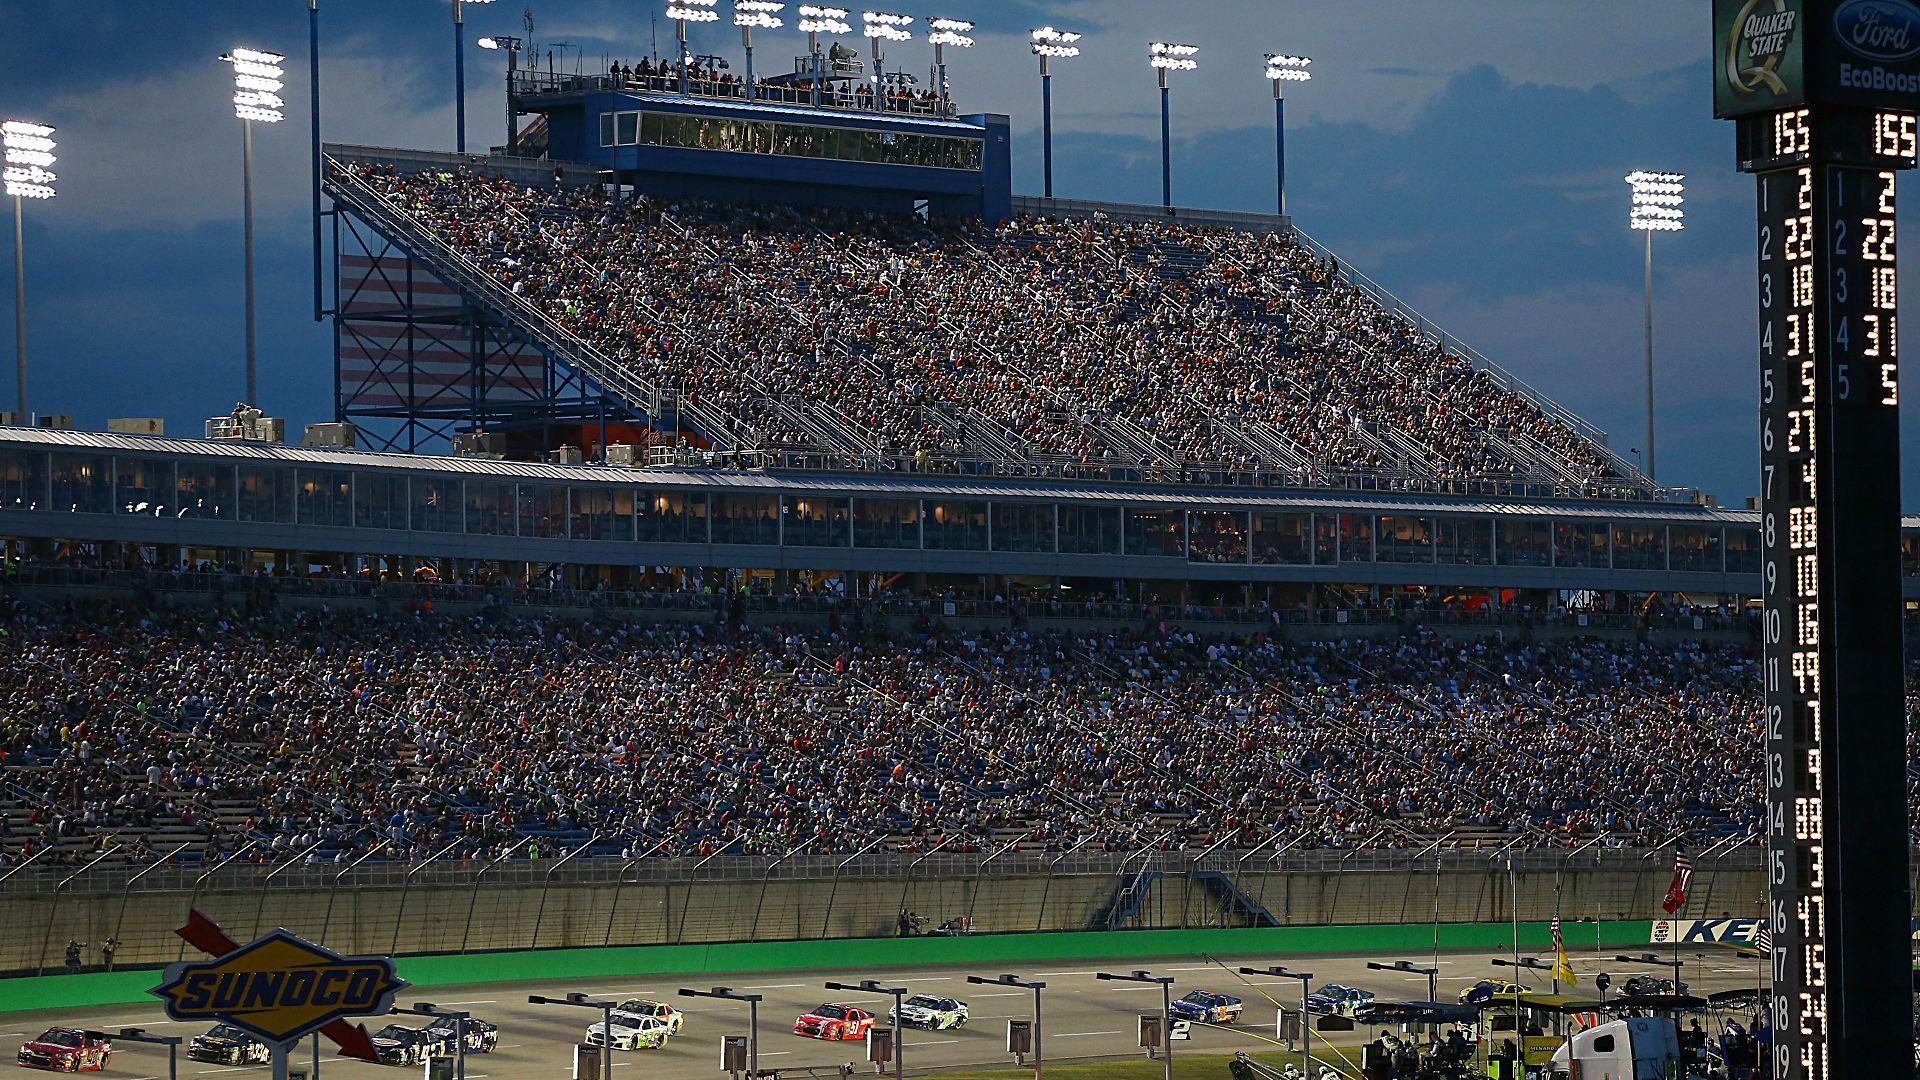 NASCAR at Kentucky: Schedule, dates, qualifying drivers